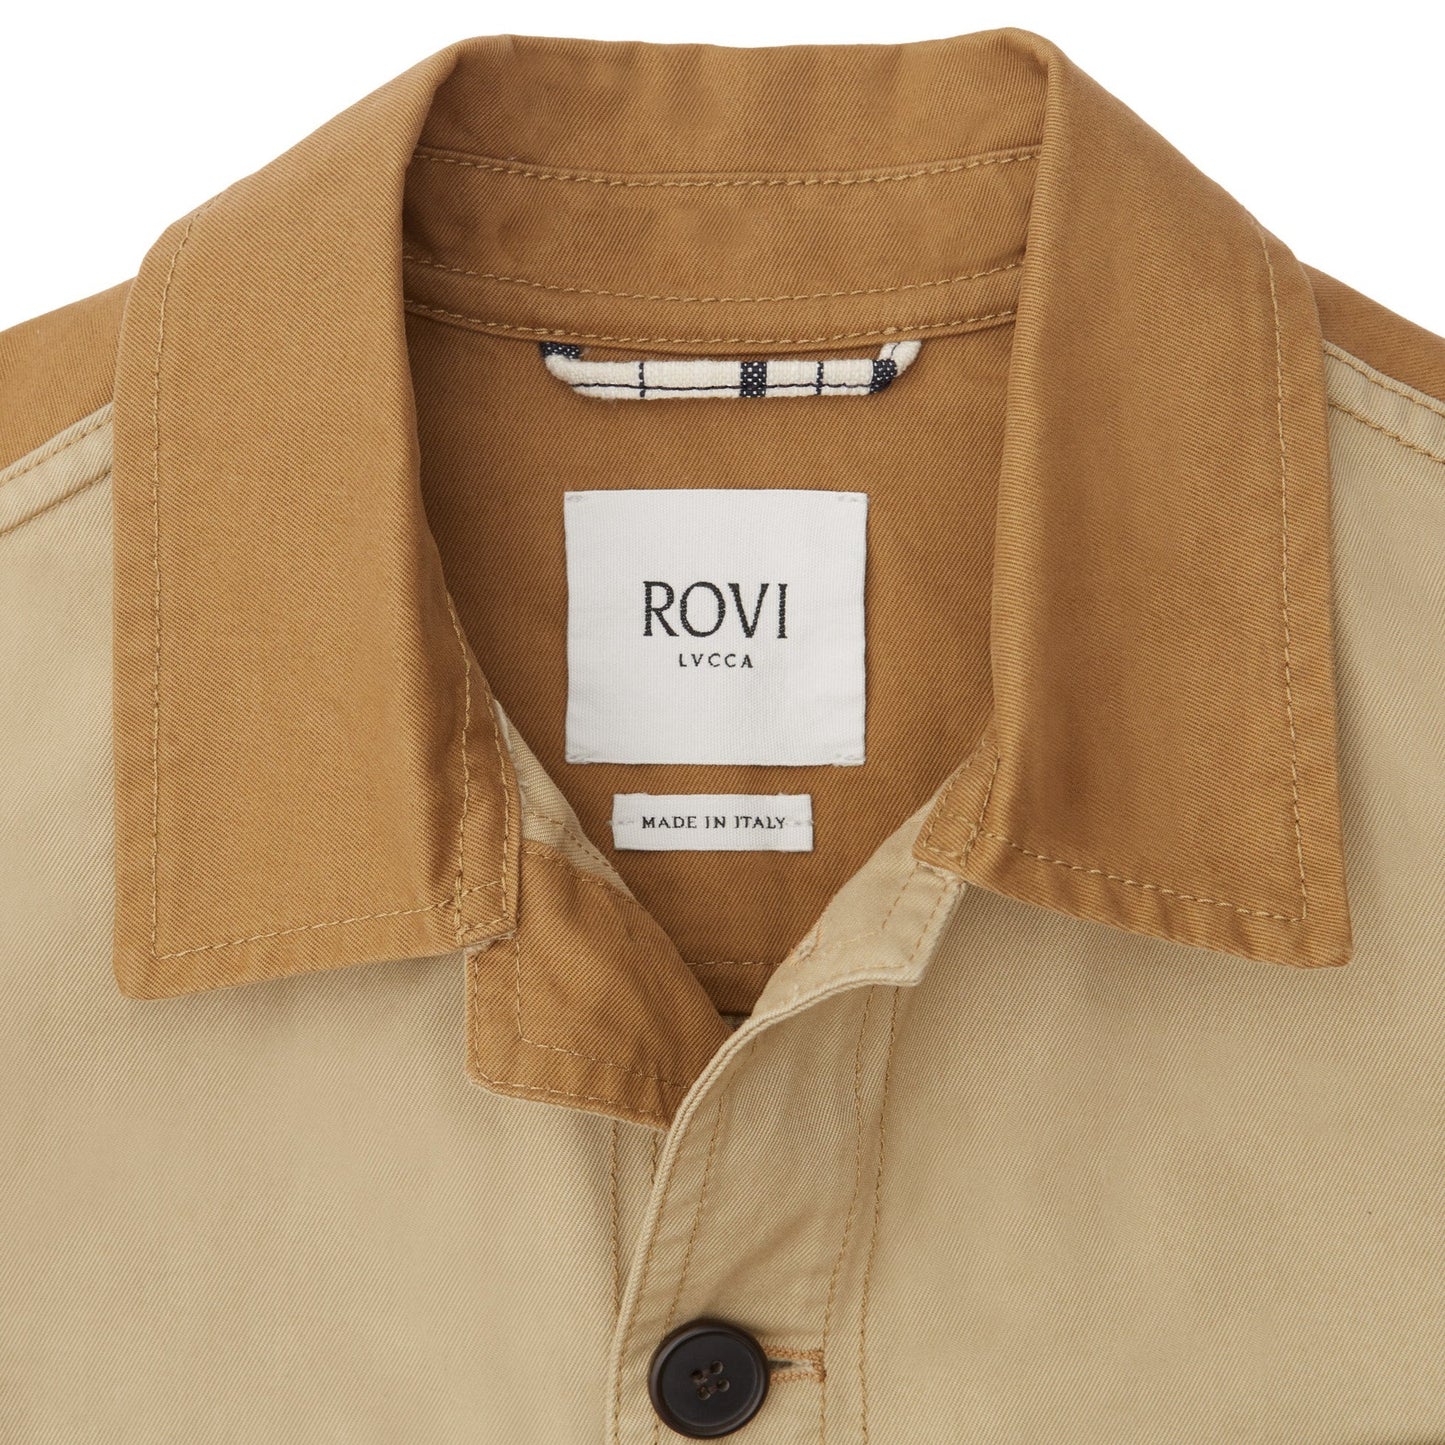 Unlined Garden Patch Jacket in Beige and Grain Cotton Twill